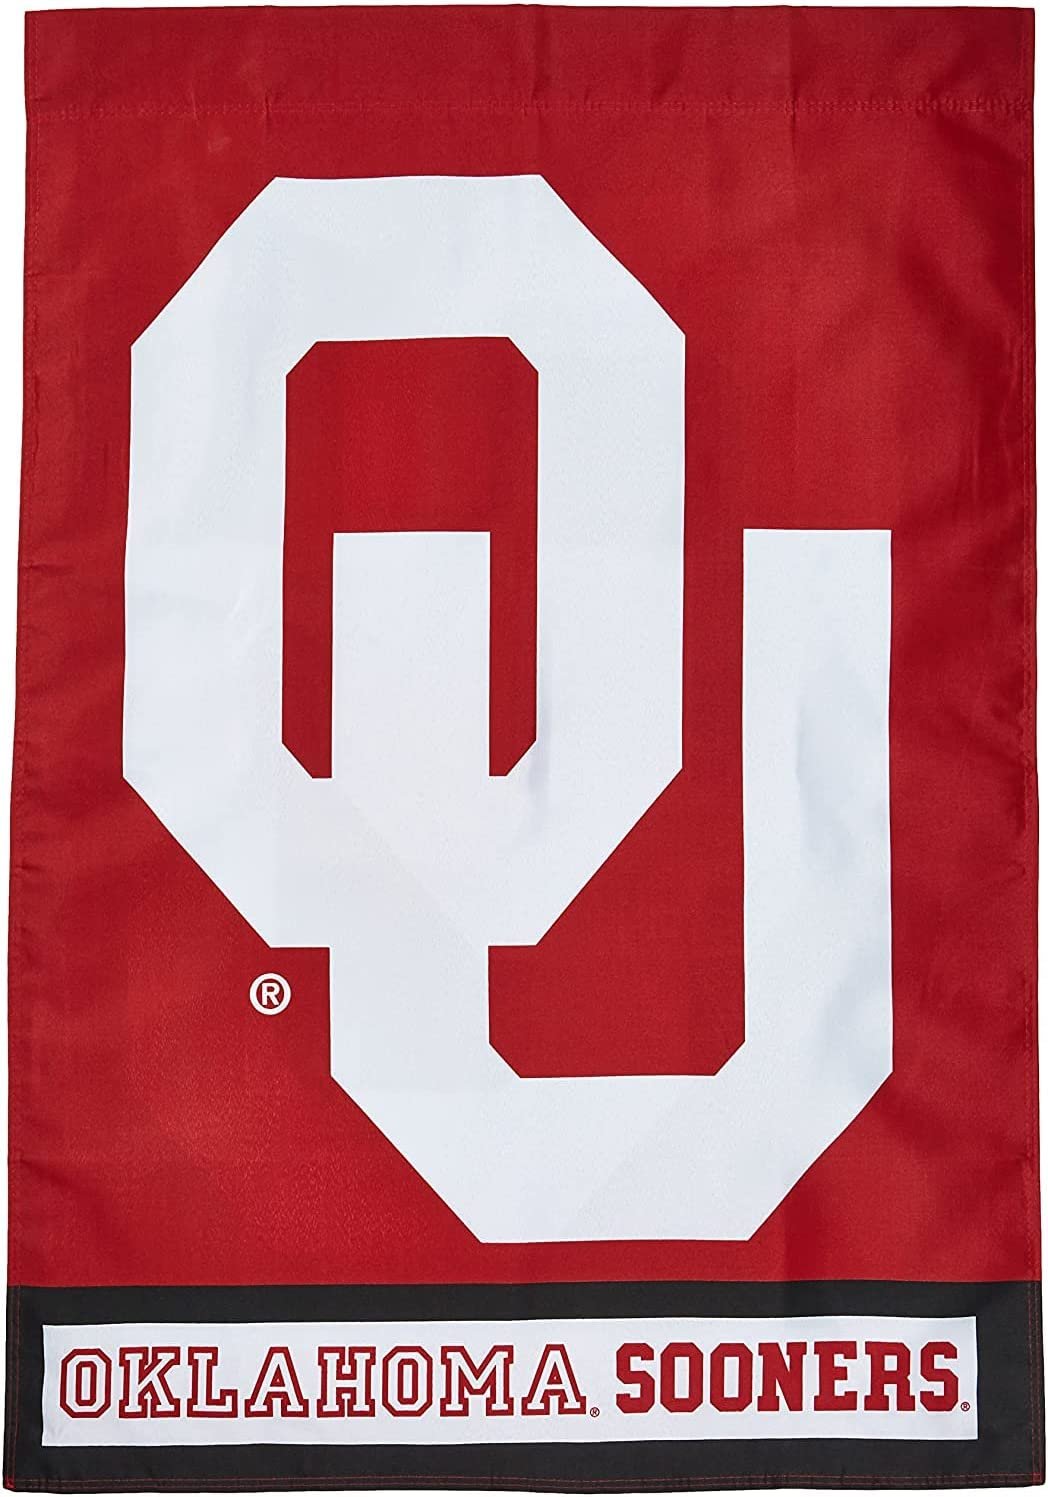 University of Oklahoma Sooners Premium 2-Sided 28x40 Inch Banner Flag with Pole Sleeve